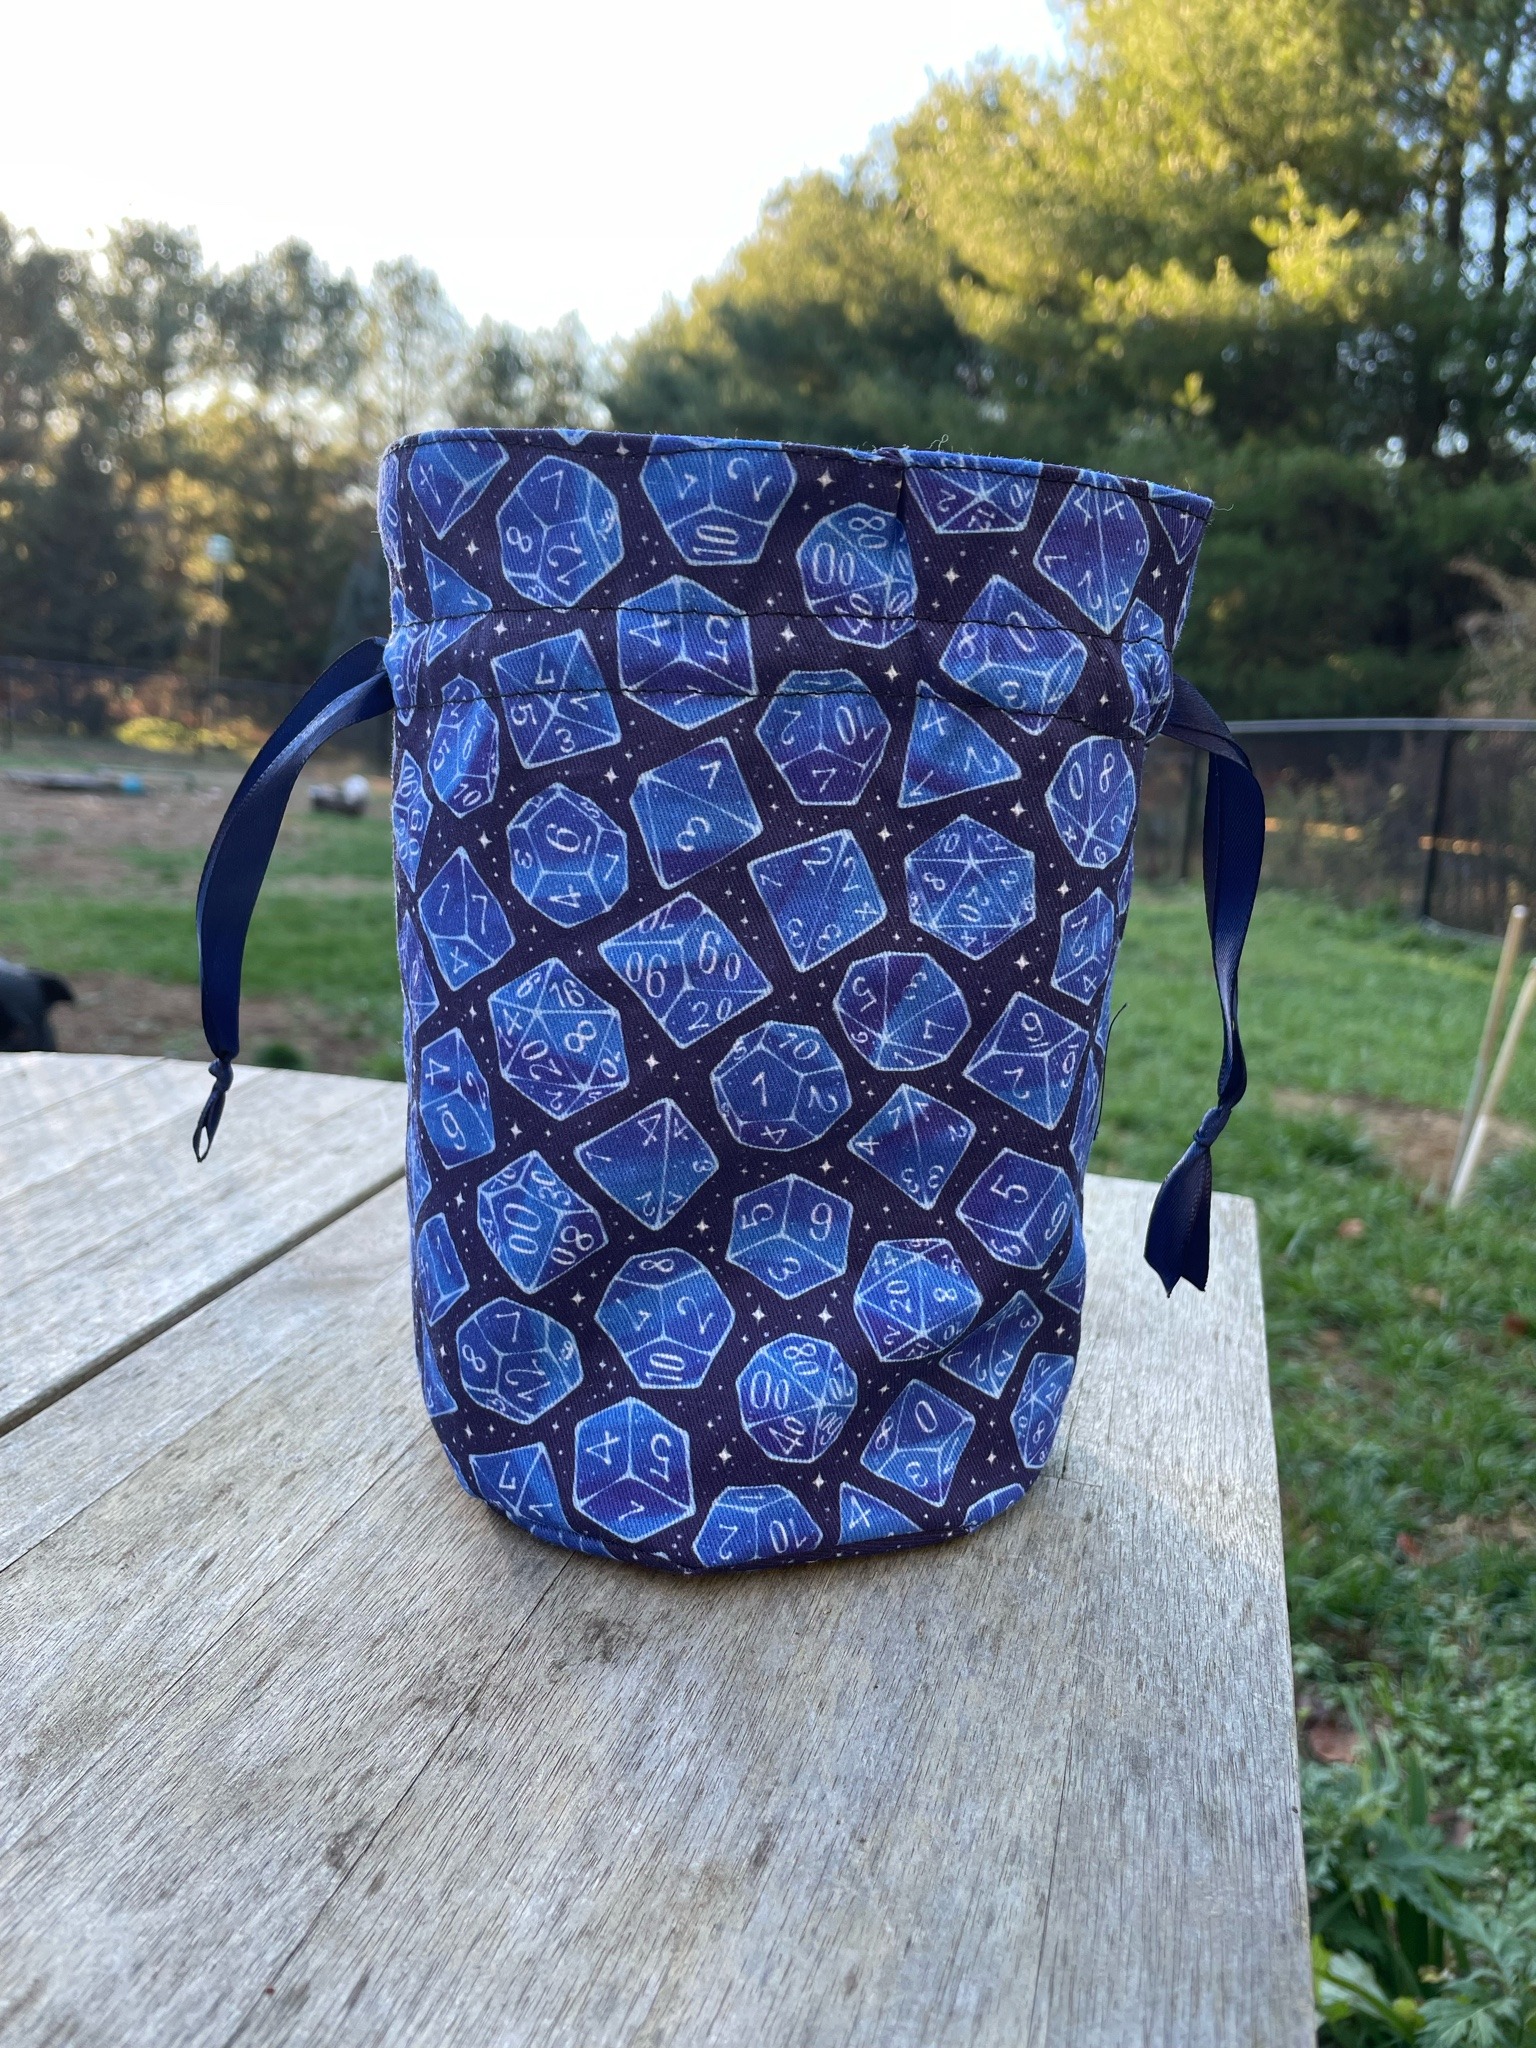 I made a dice bag from some cool custom fabric! It’s currently 1 of 1 from me,